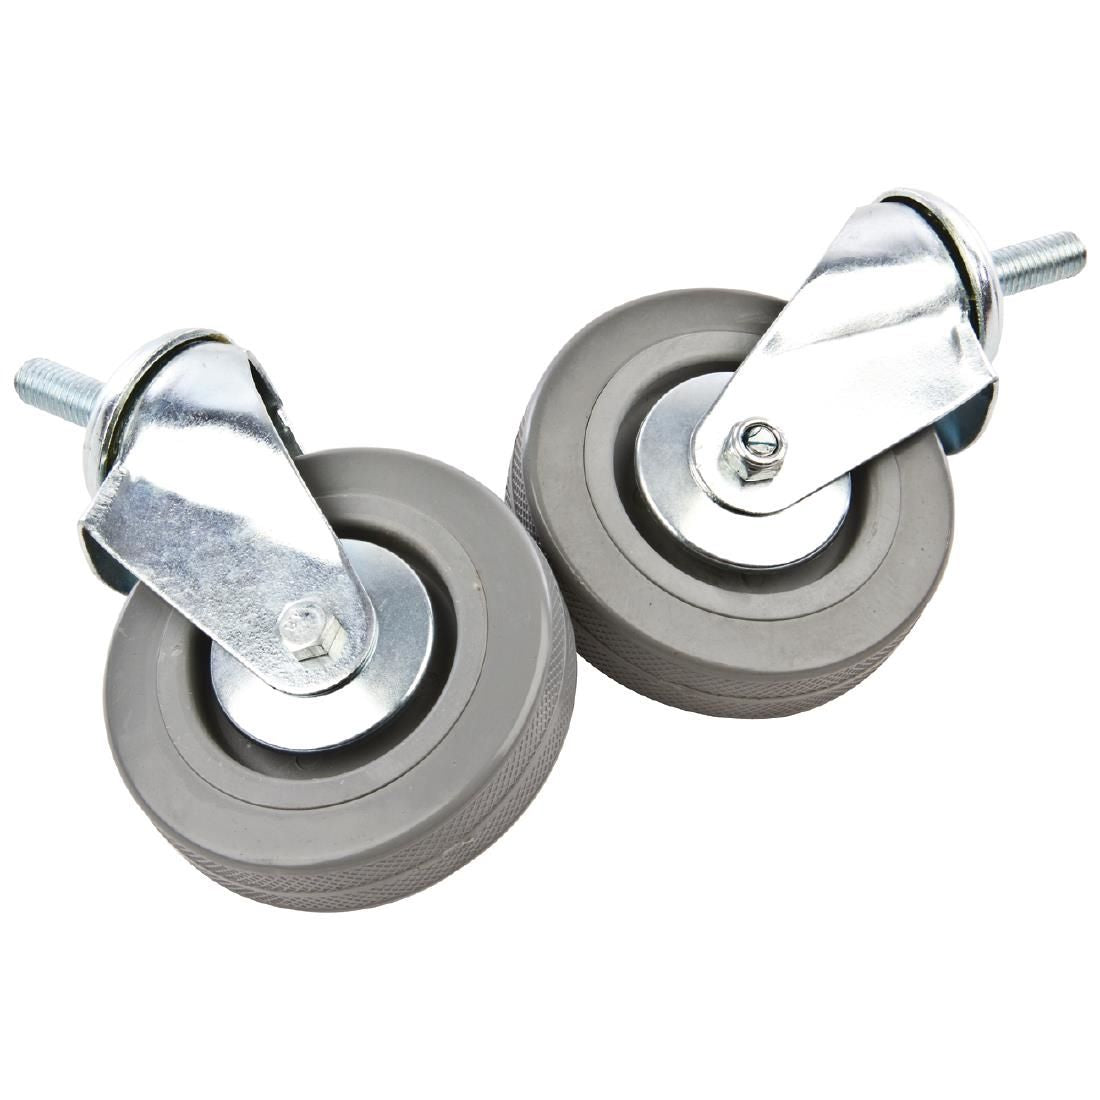 AC679 Vogue Castors for Stainless Steel Trolleys (Pack of 2) JD Catering Equipment Solutions Ltd